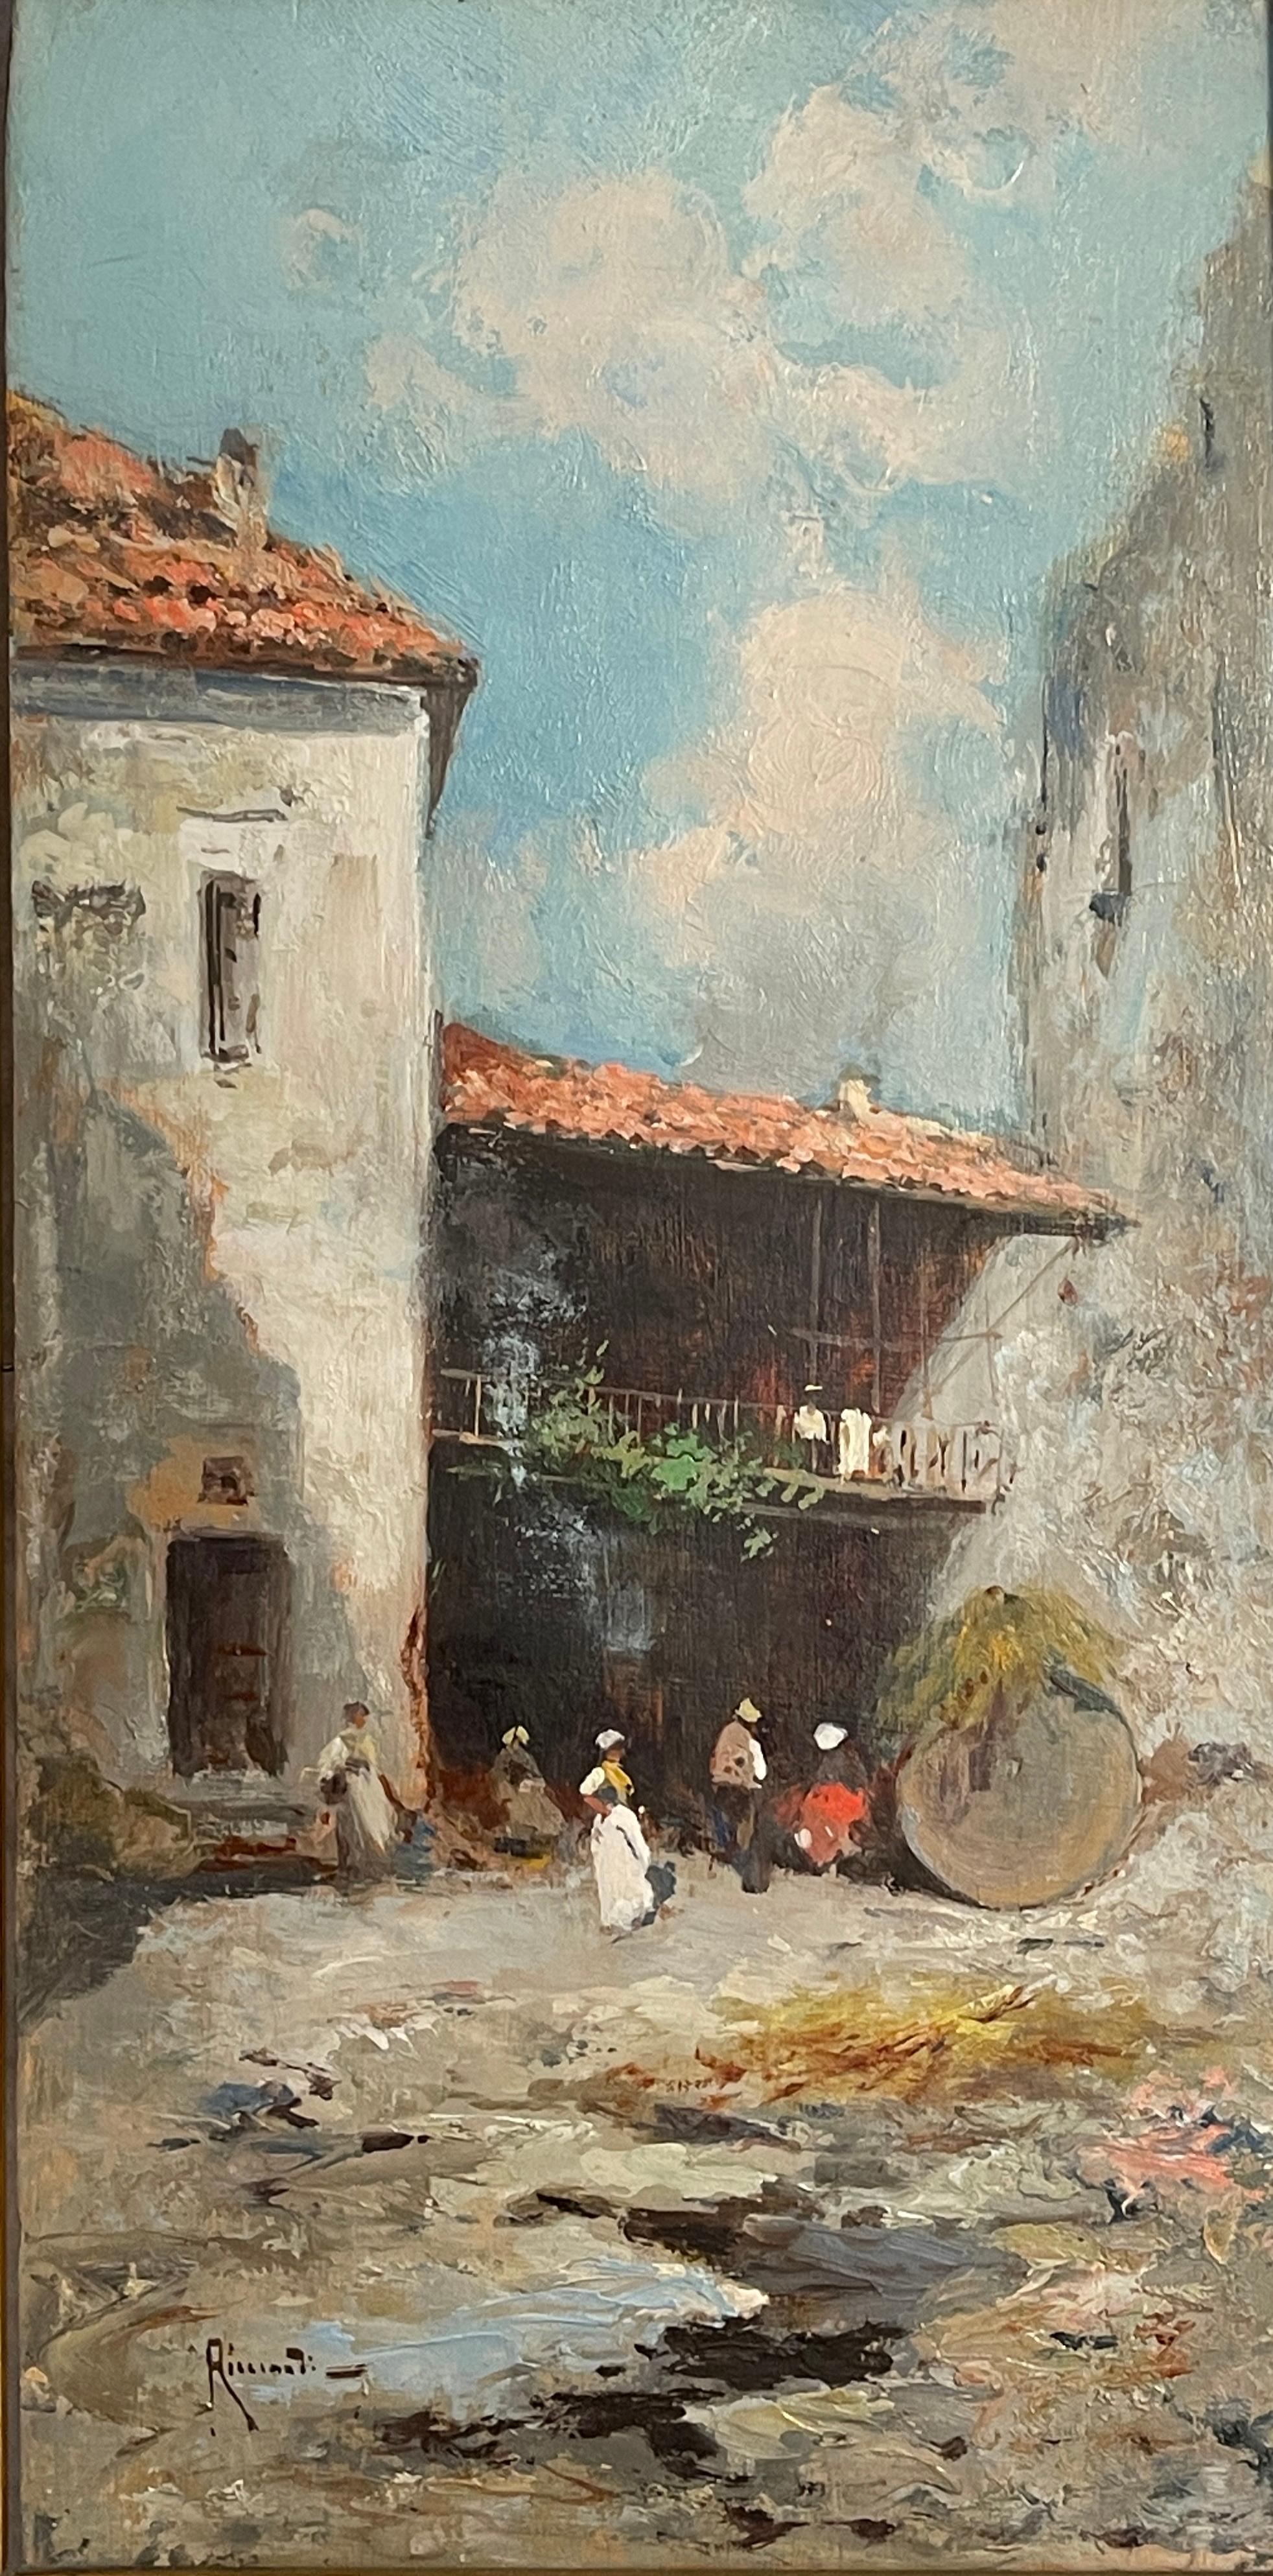 Oil painting on wood, country houses, late 19th century, Ricciardi
Oil painting on wood, depicting an interior scenario of railing houses with characters.
Signed lower left and on the back the title “Case campestri”.
Good condition as from